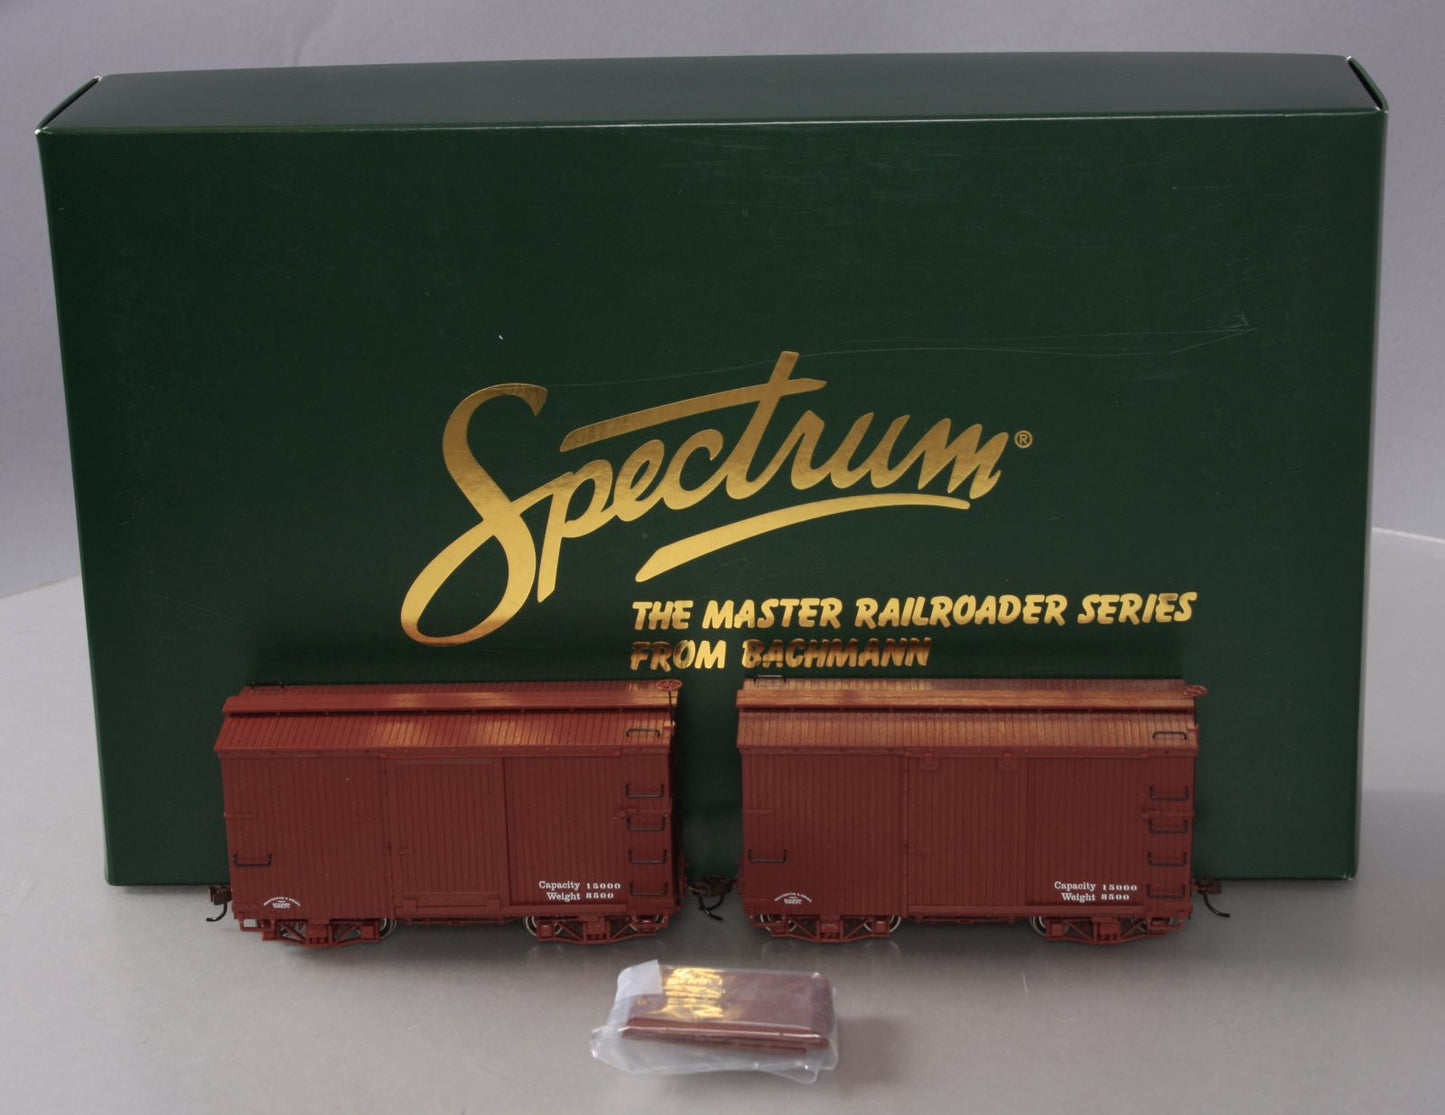 Bachmann 26501 On30 Data Only Oxide Red 18' Wood Box Car (Set of 2)